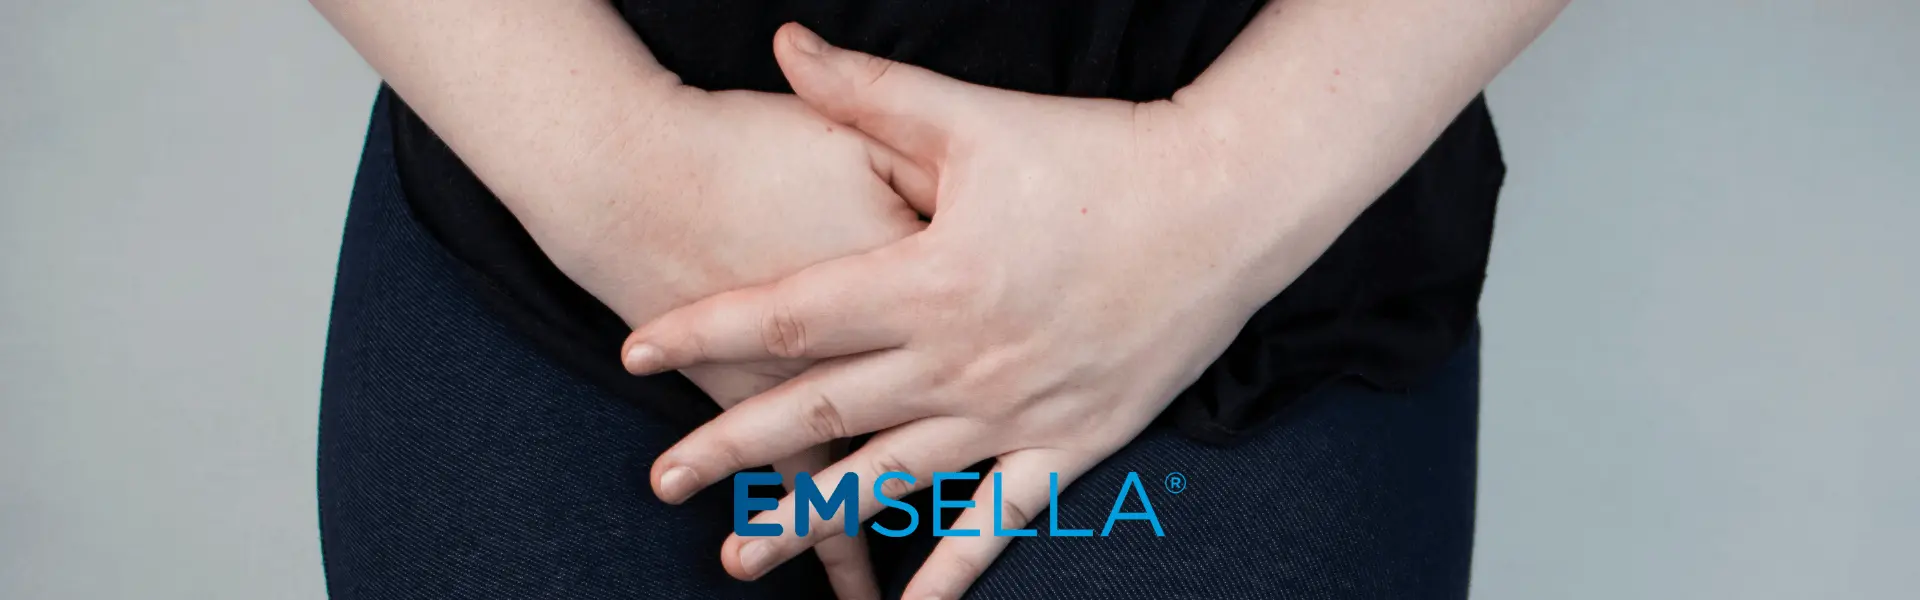 A woman's hands with the word ensella written on them.